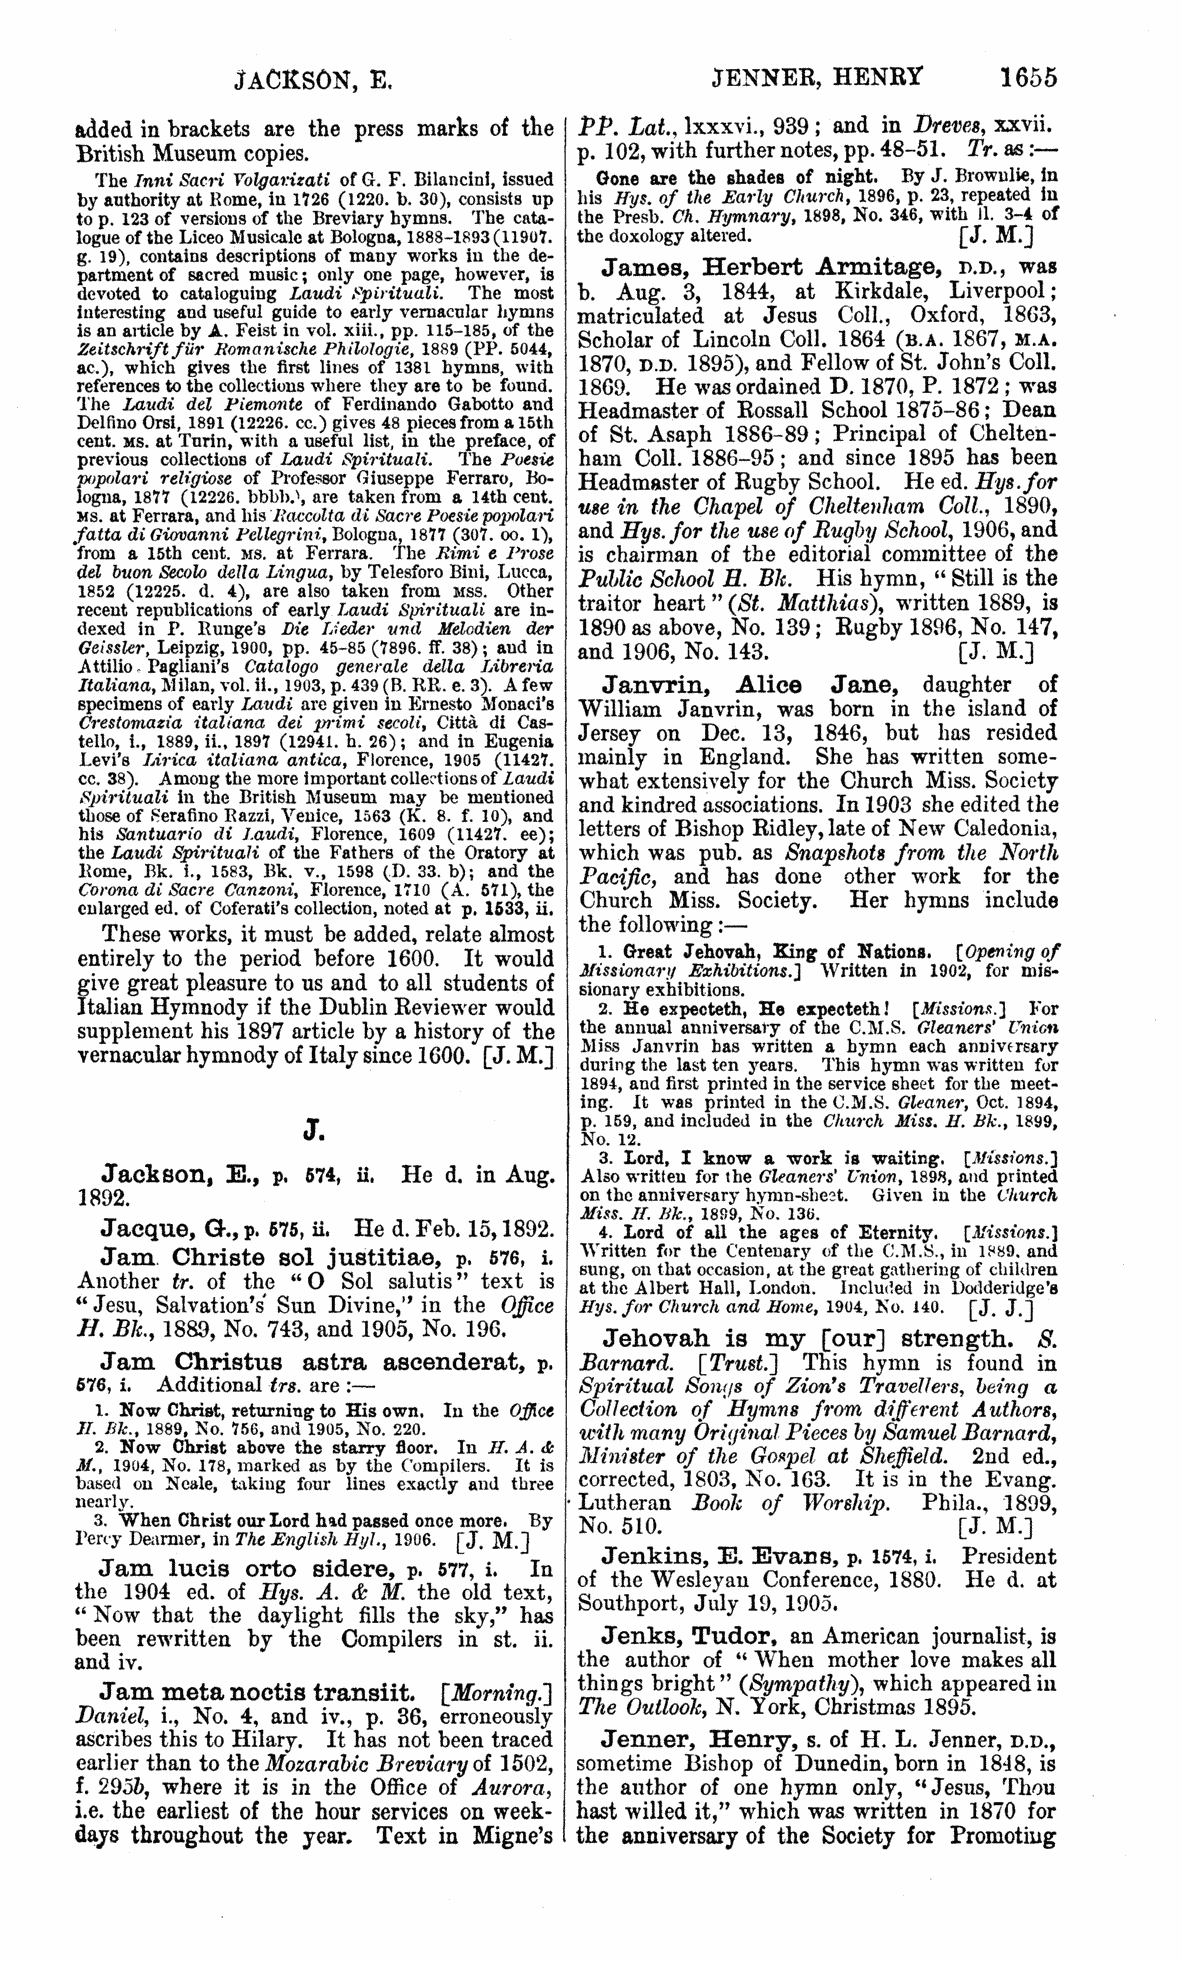 Image of page 1655